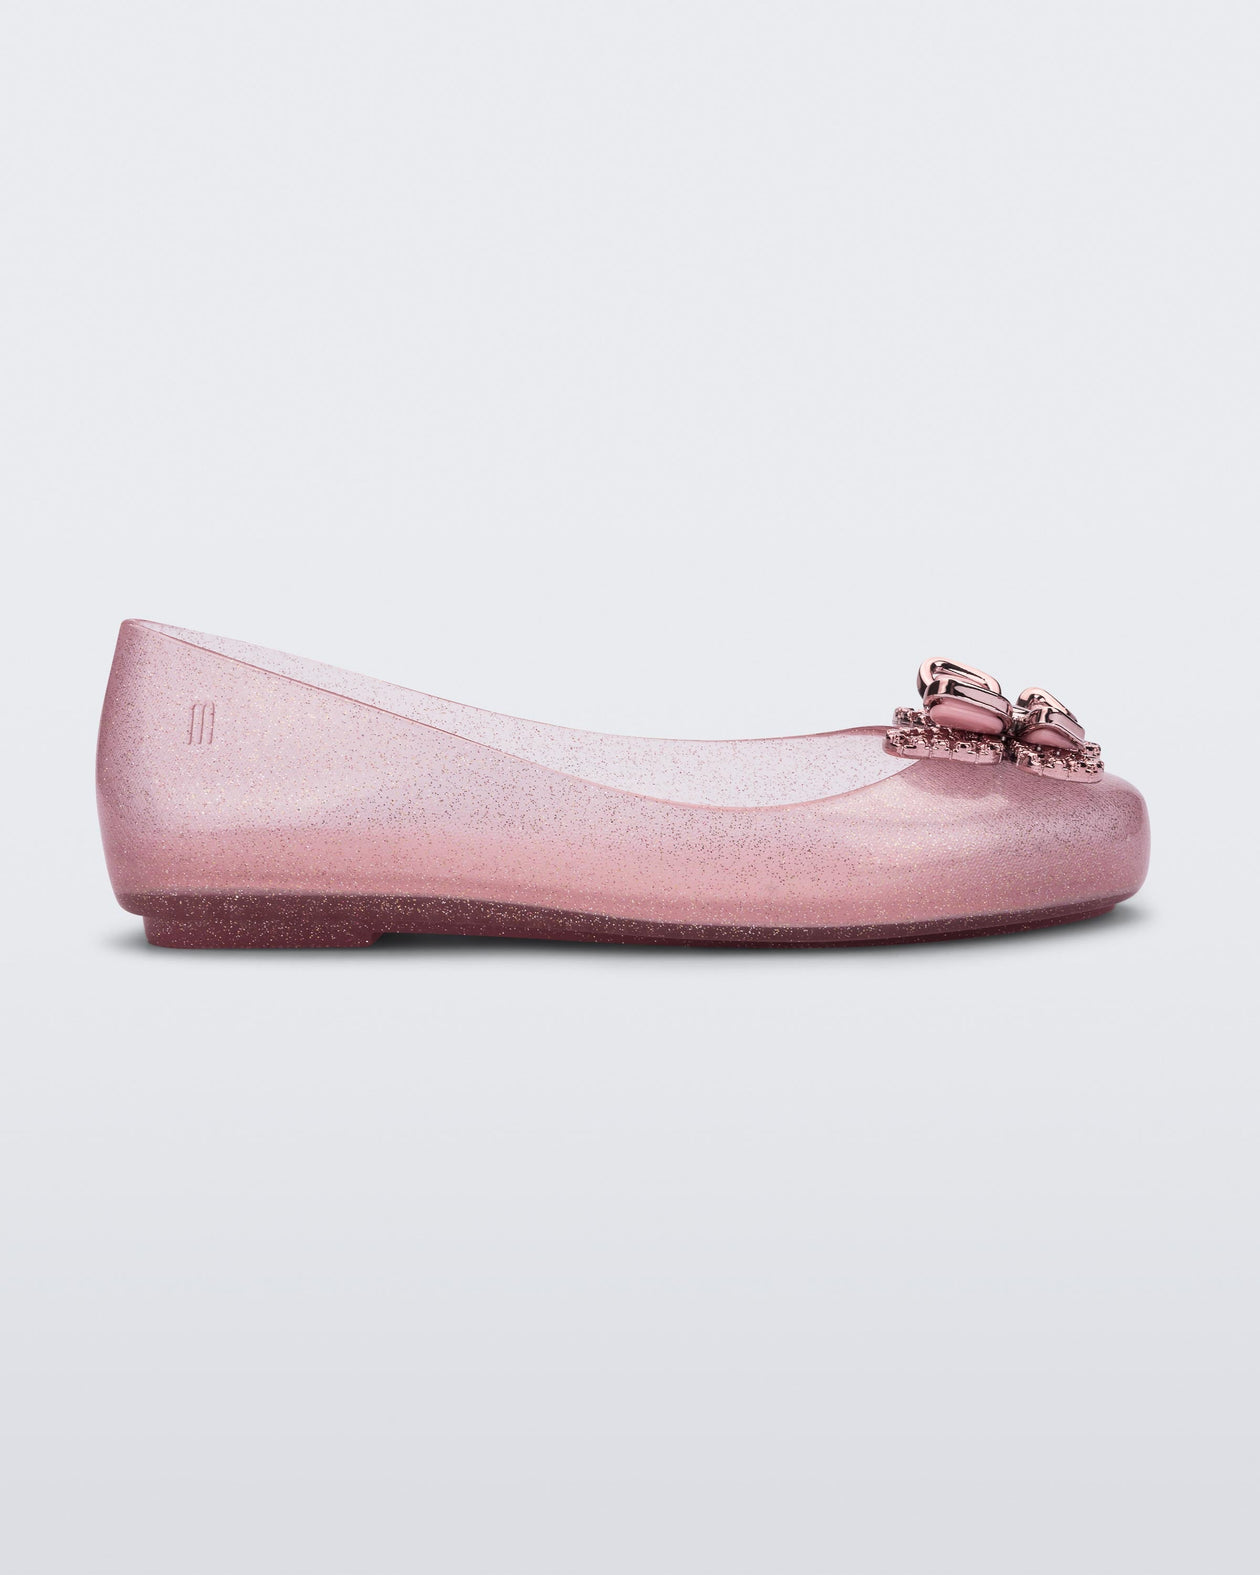 Side view of a glitter pink Mini Melissa Sweet Love Butterfly flat with a pink butterfly detail on the toe